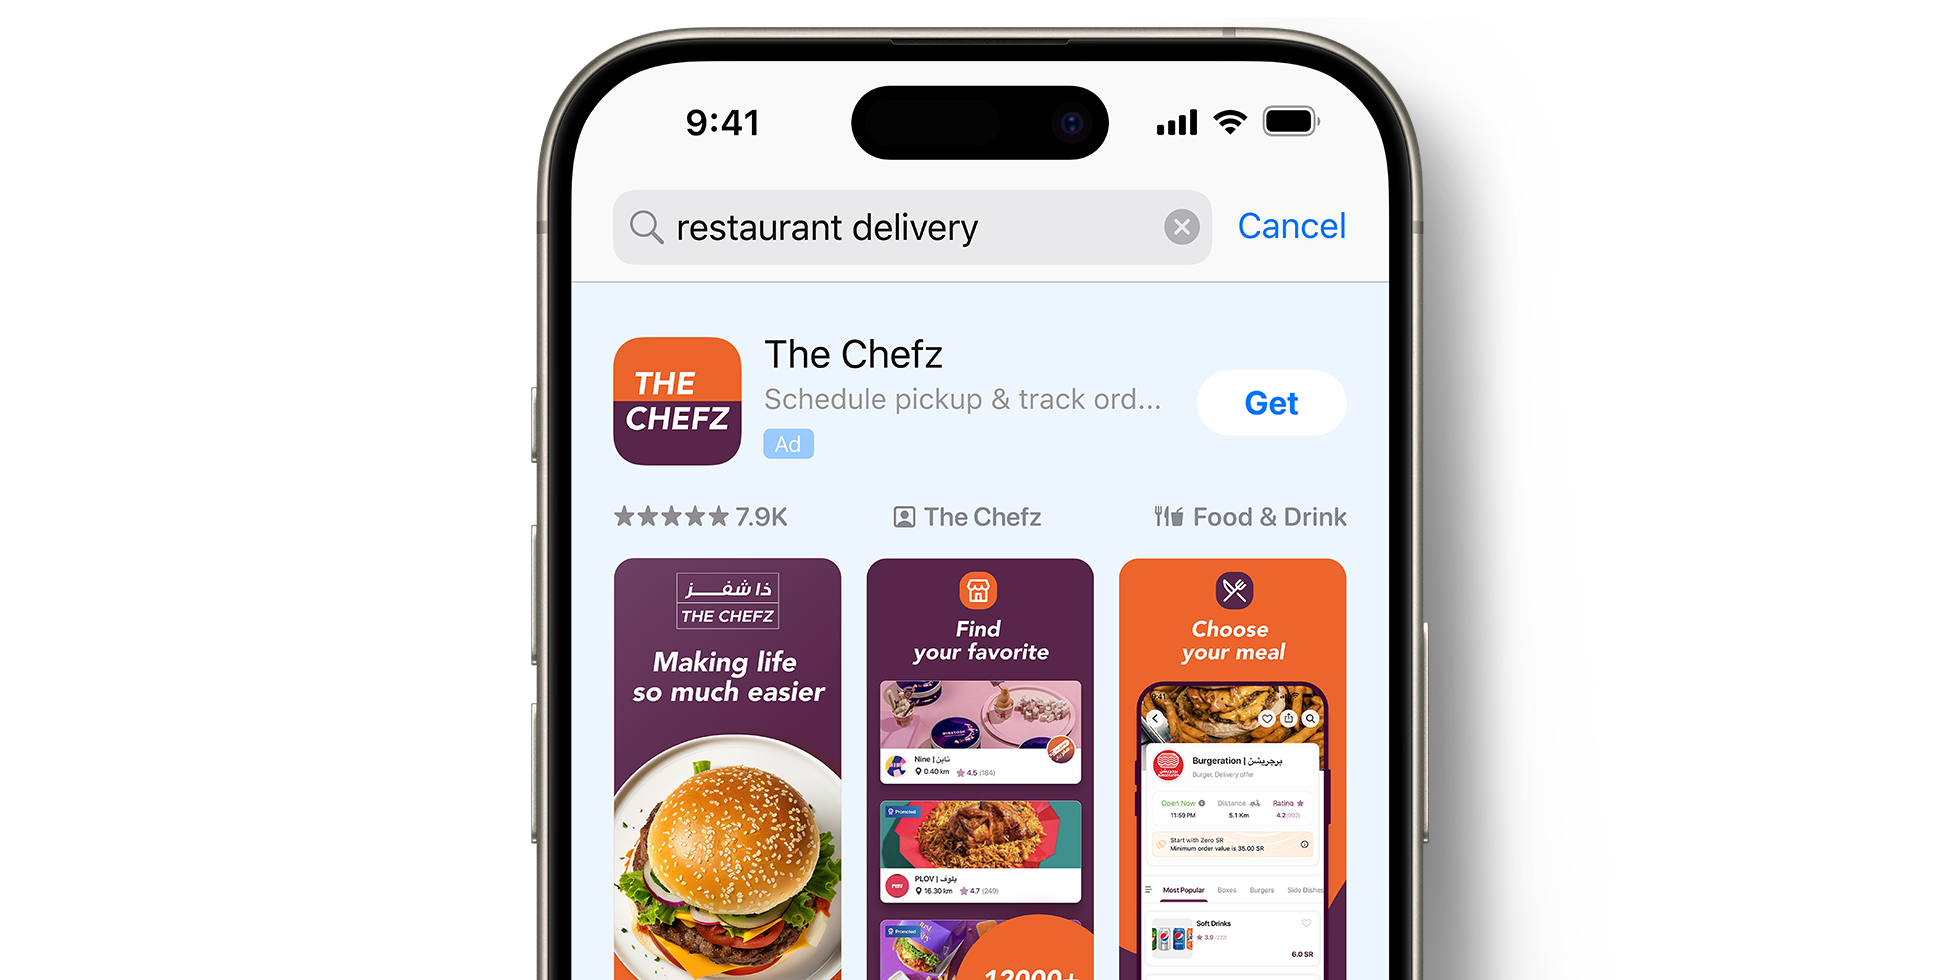 The Chefz ad on the App Store 